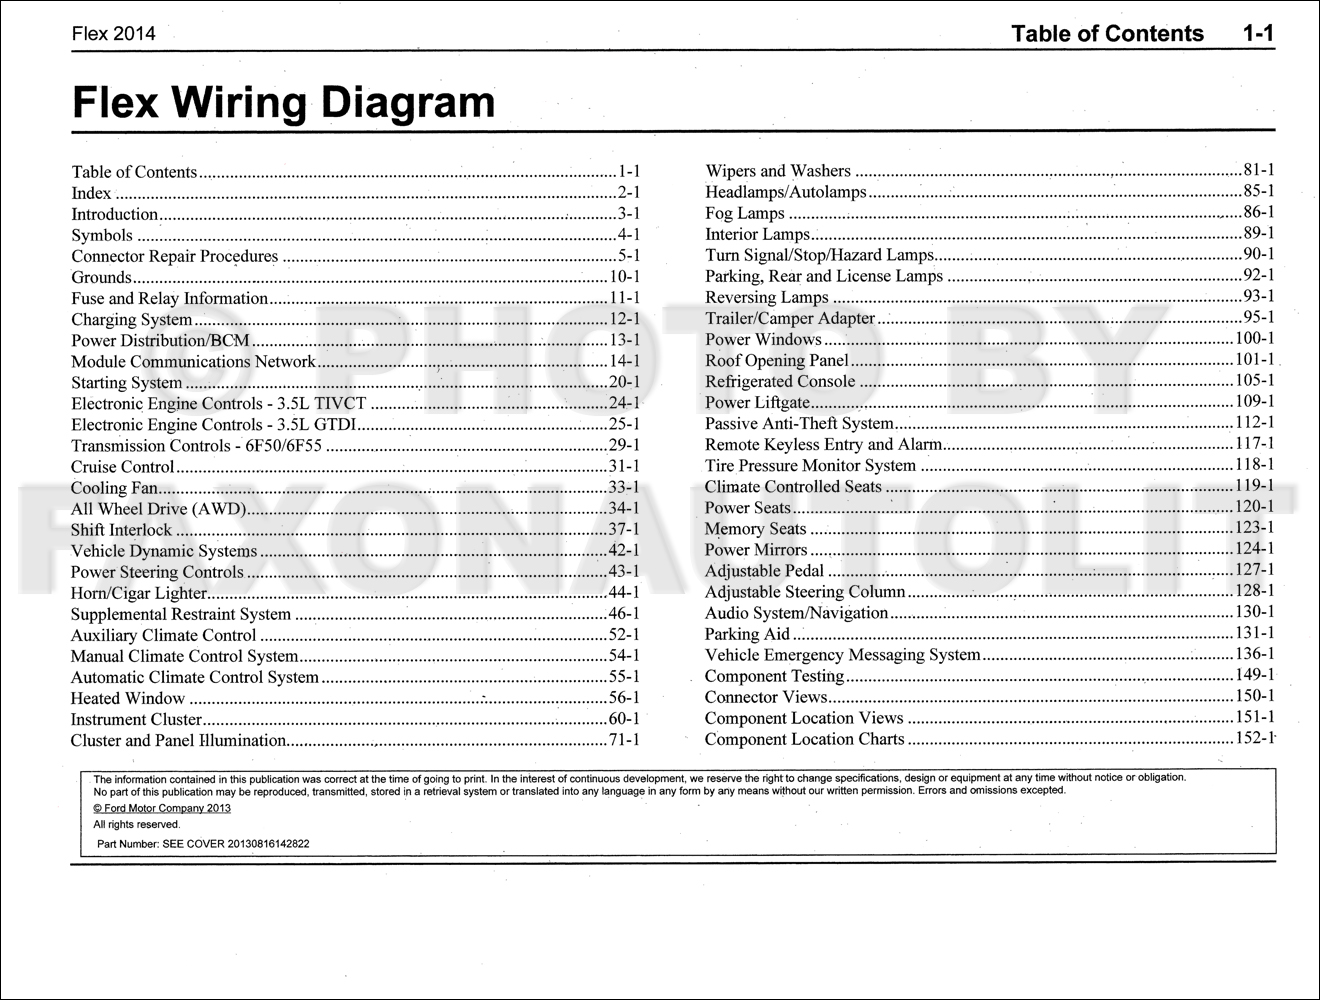 Ford Flex 2014 Backup Camera Wiring Diagram from cfd84b34cf9dfc880d71-bd309e0dbcabe608601fc9c9c352796e.ssl.cf1.rackcdn.com